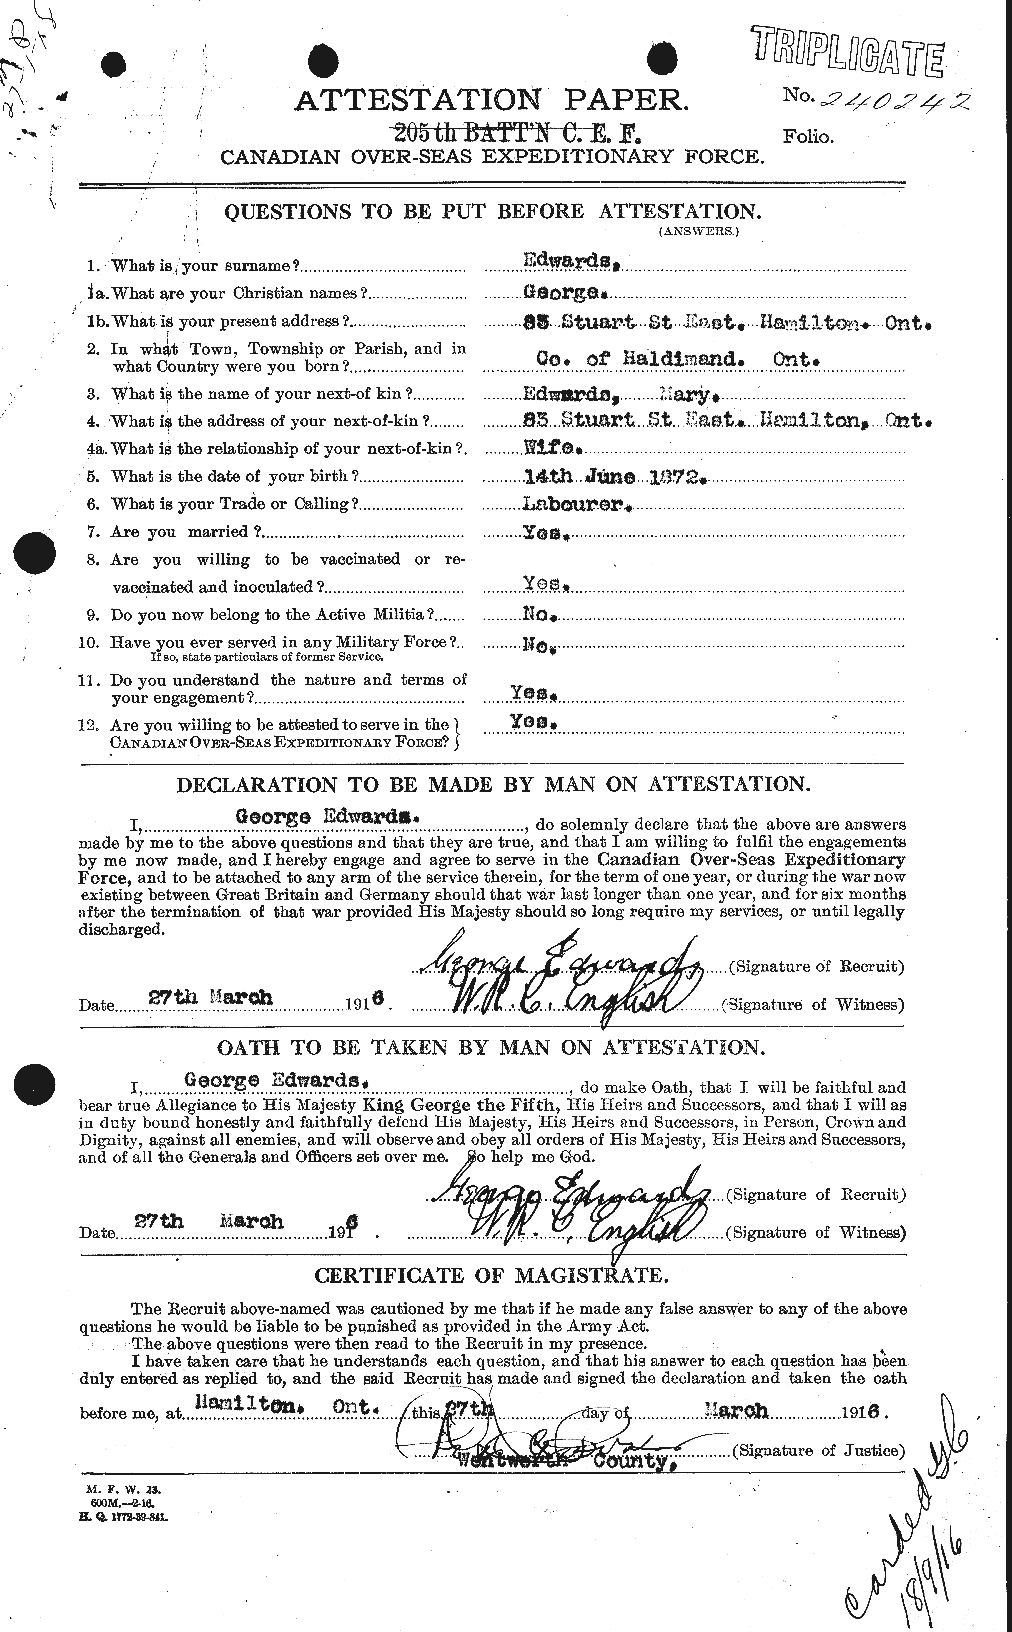 Personnel Records of the First World War - CEF 309664a